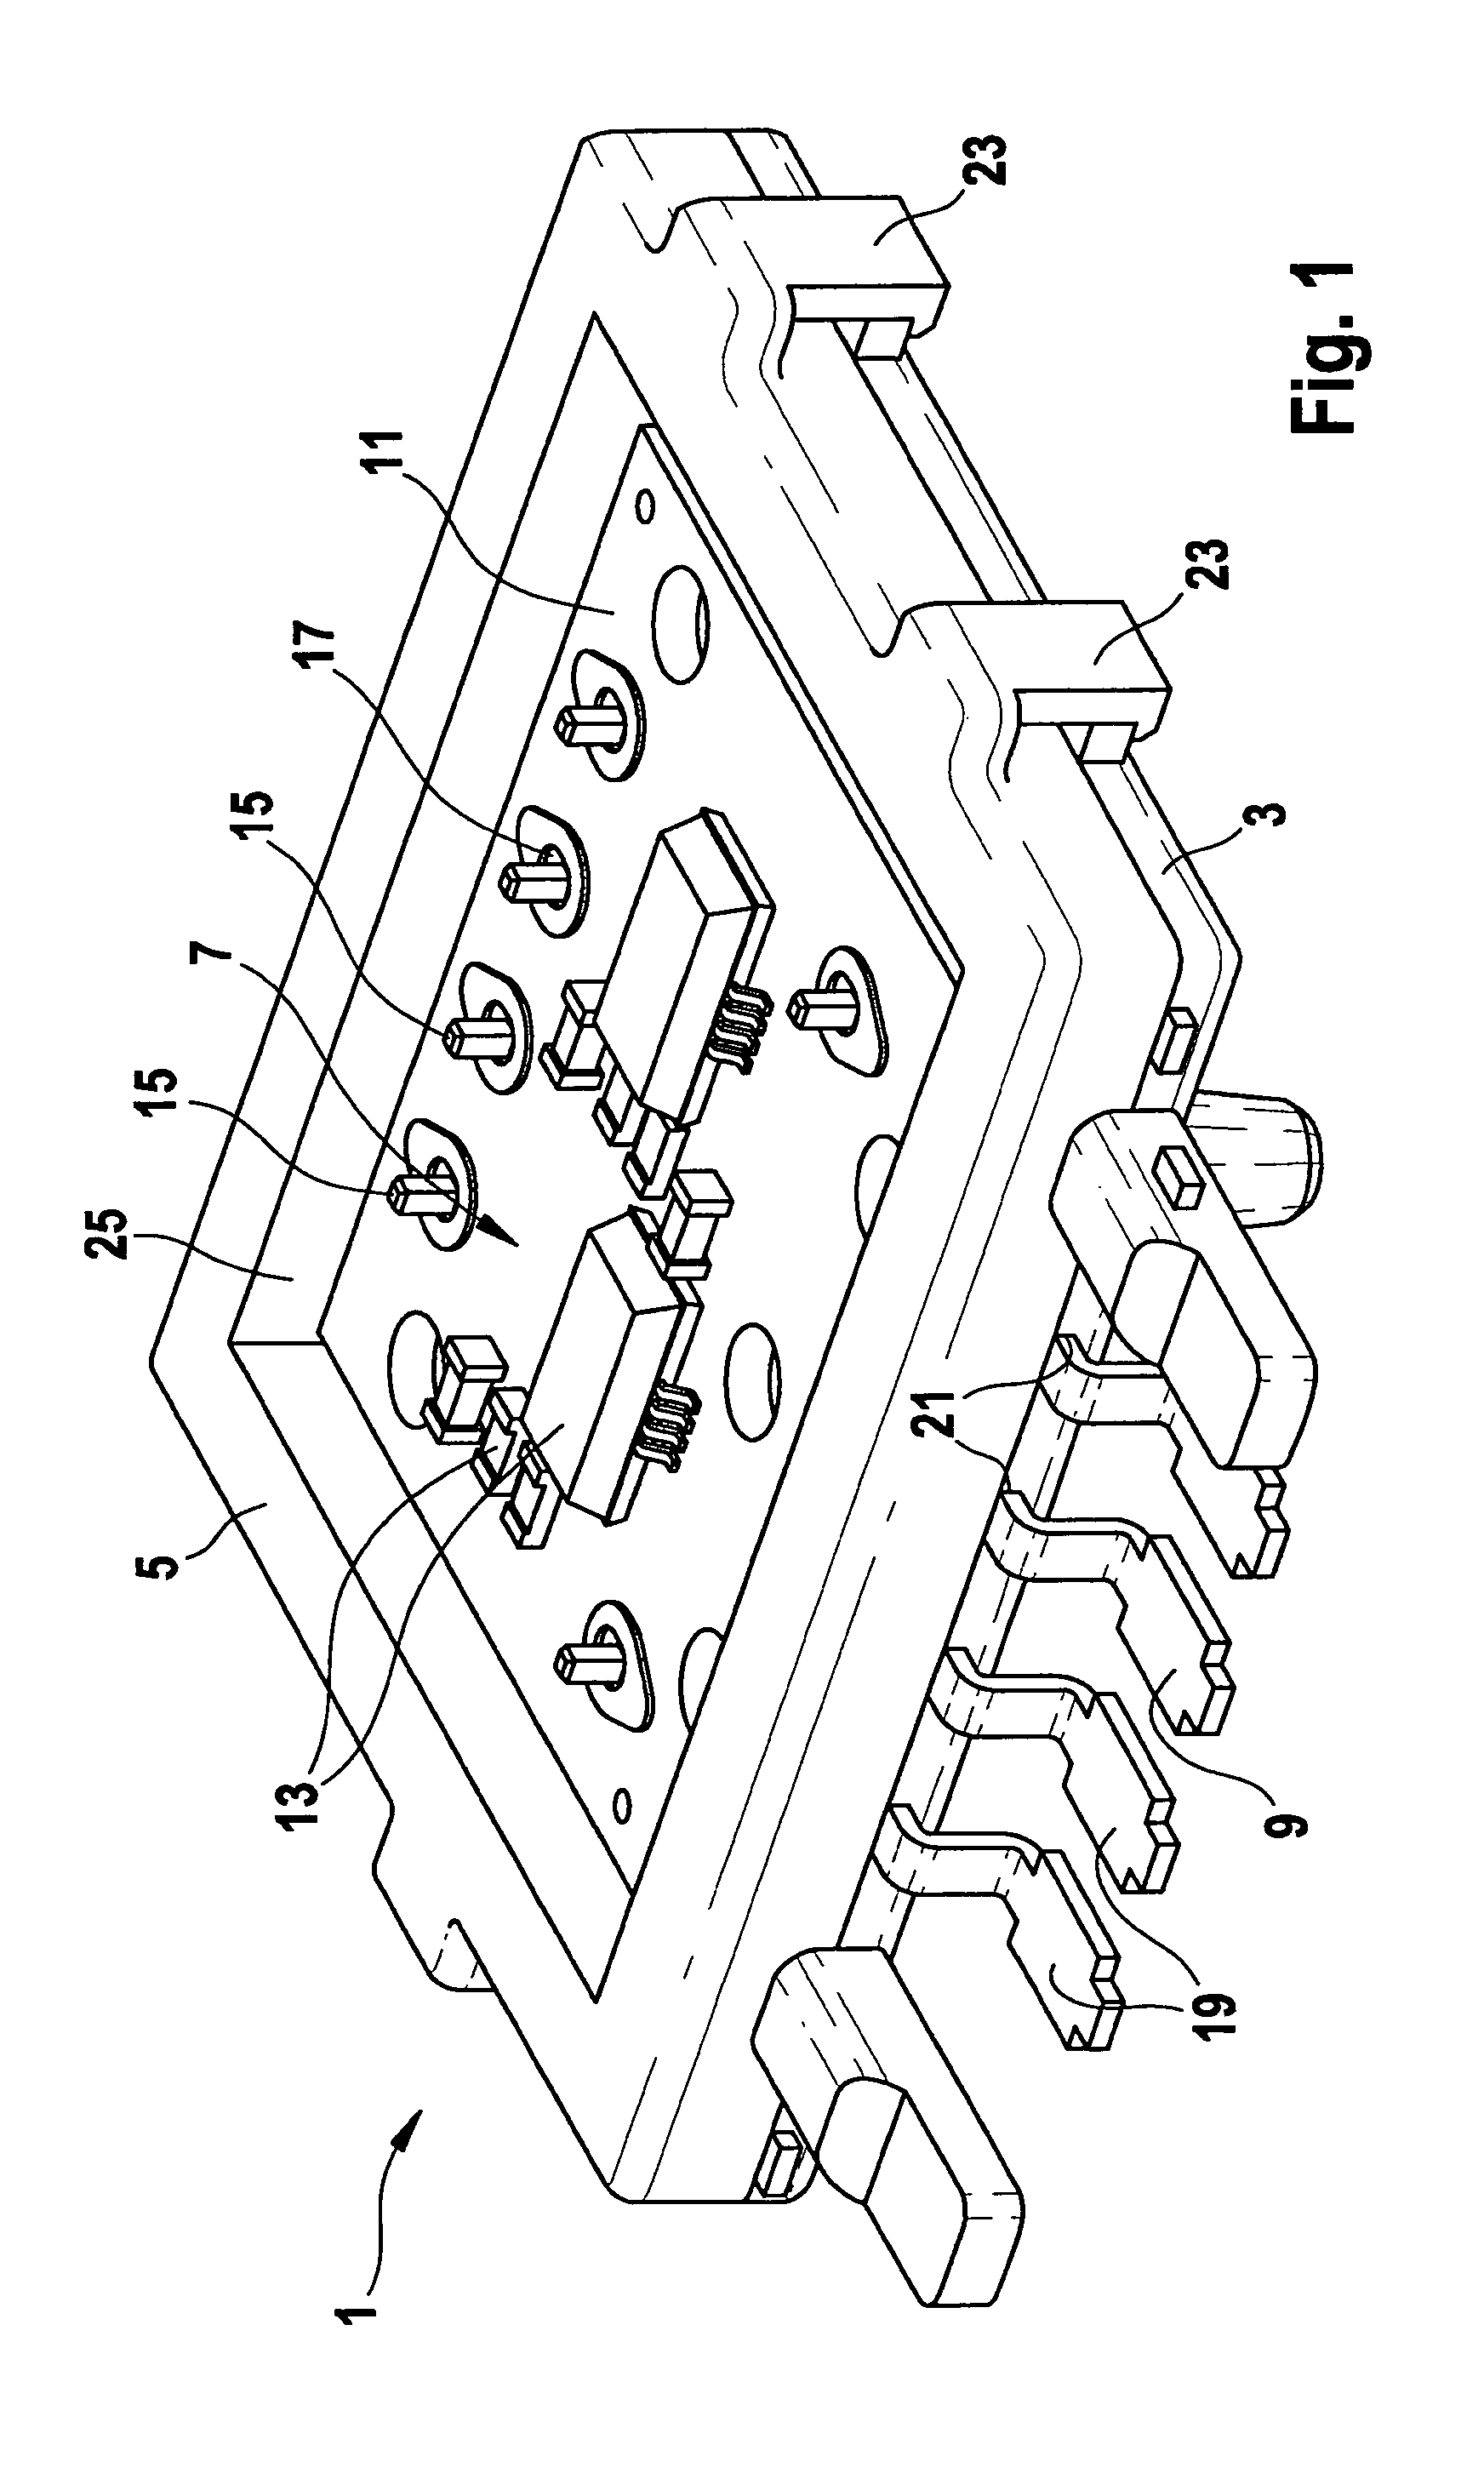 Sealing frame and method for covering a component